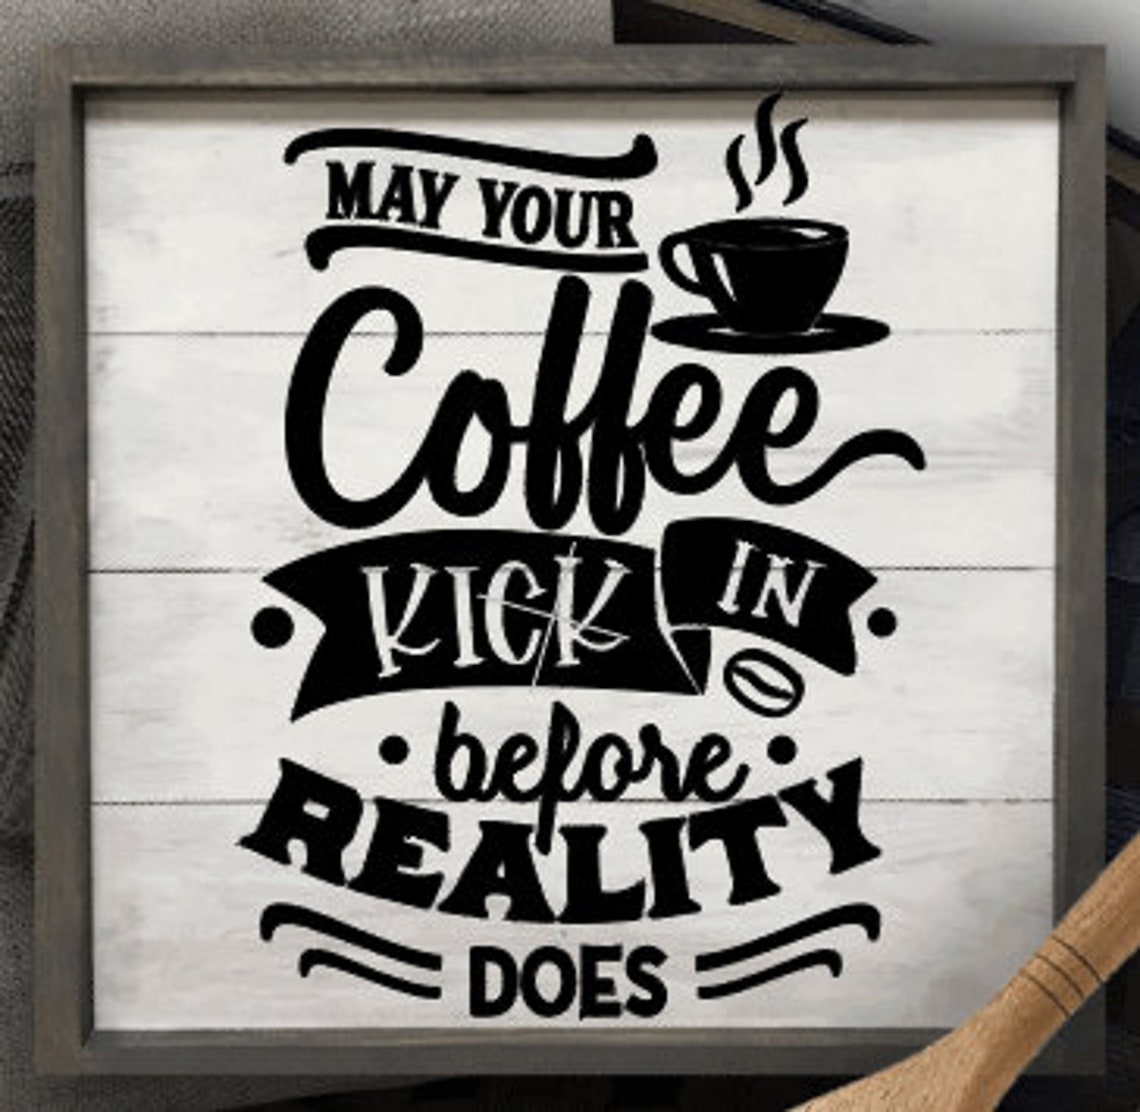 All 96+ Images may your coffee kick in before your reality does Stunning